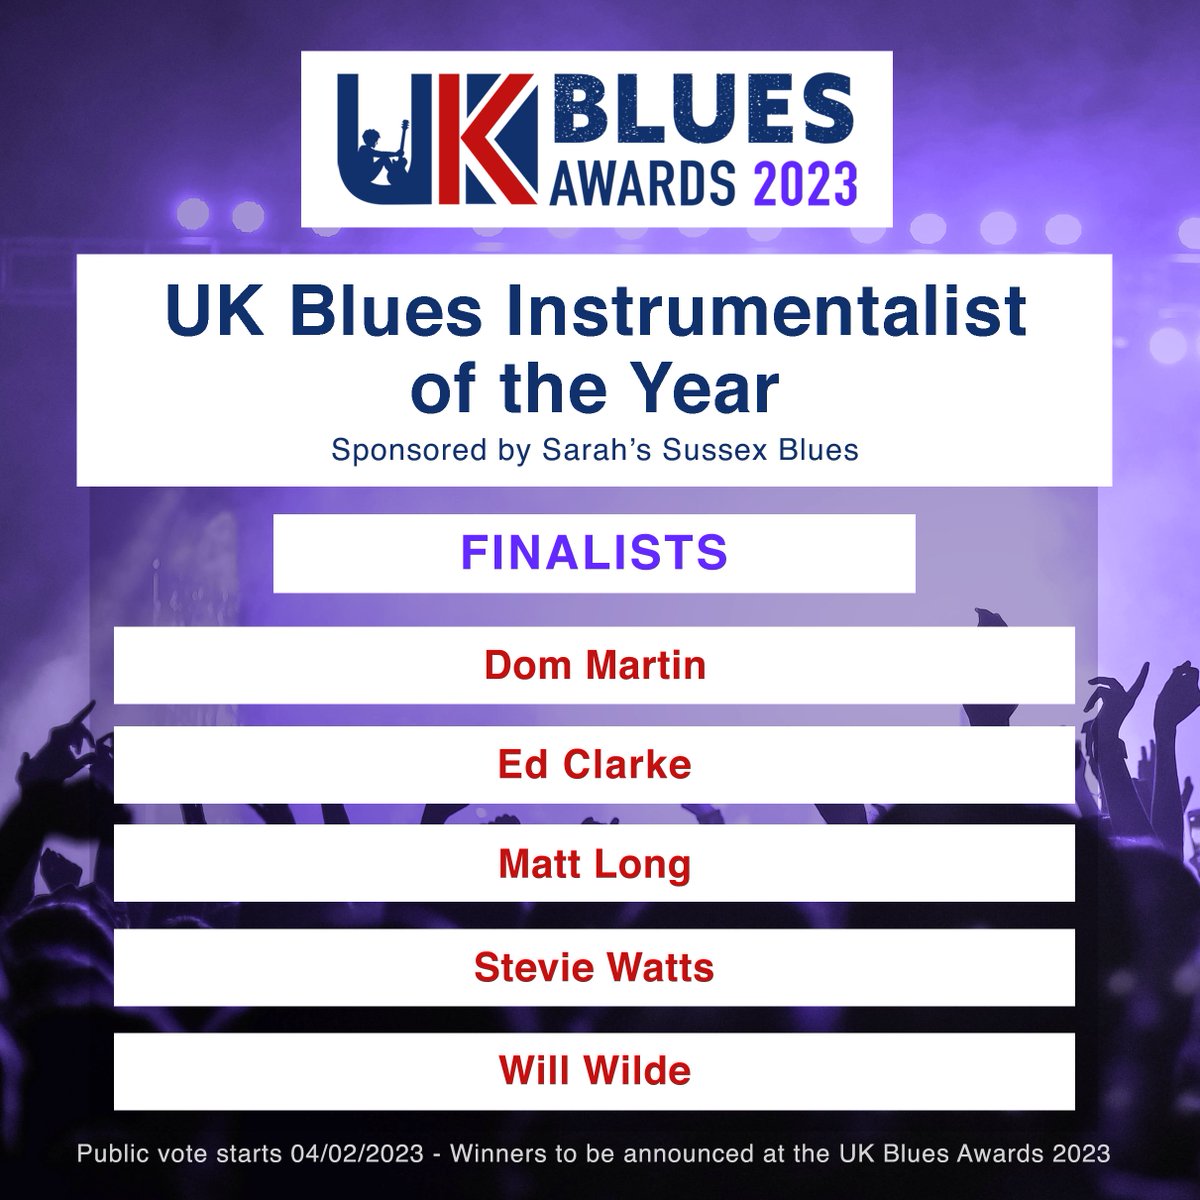 Today's the day we reveal the top 5 nominees who are the Finalists in each category in The UK Blues Awards. Congratulations to all involved! Public voting starts on 4th February so watch out for the link then. Here's the Instrumentalist of The Year category Finalists